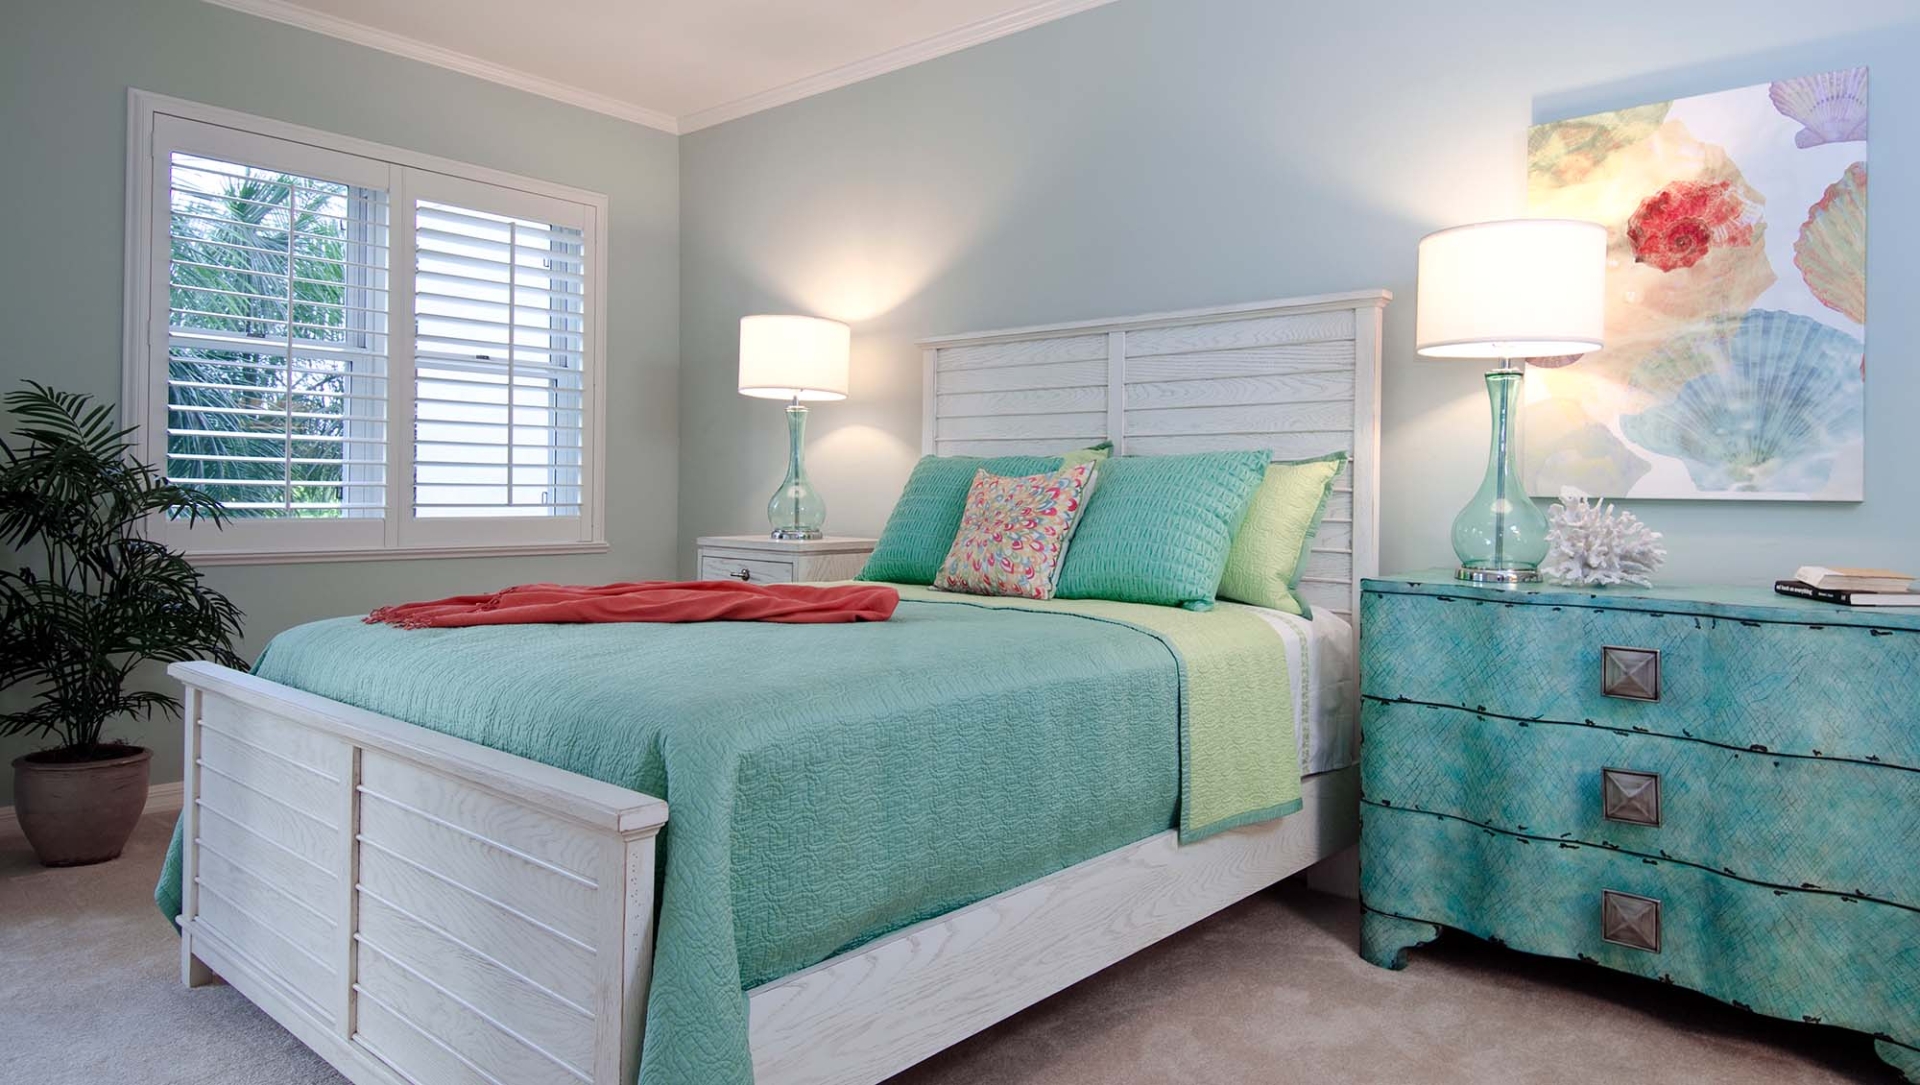 The guest bedroom in the Rosemont Model Home at Shell Point Retirement Community